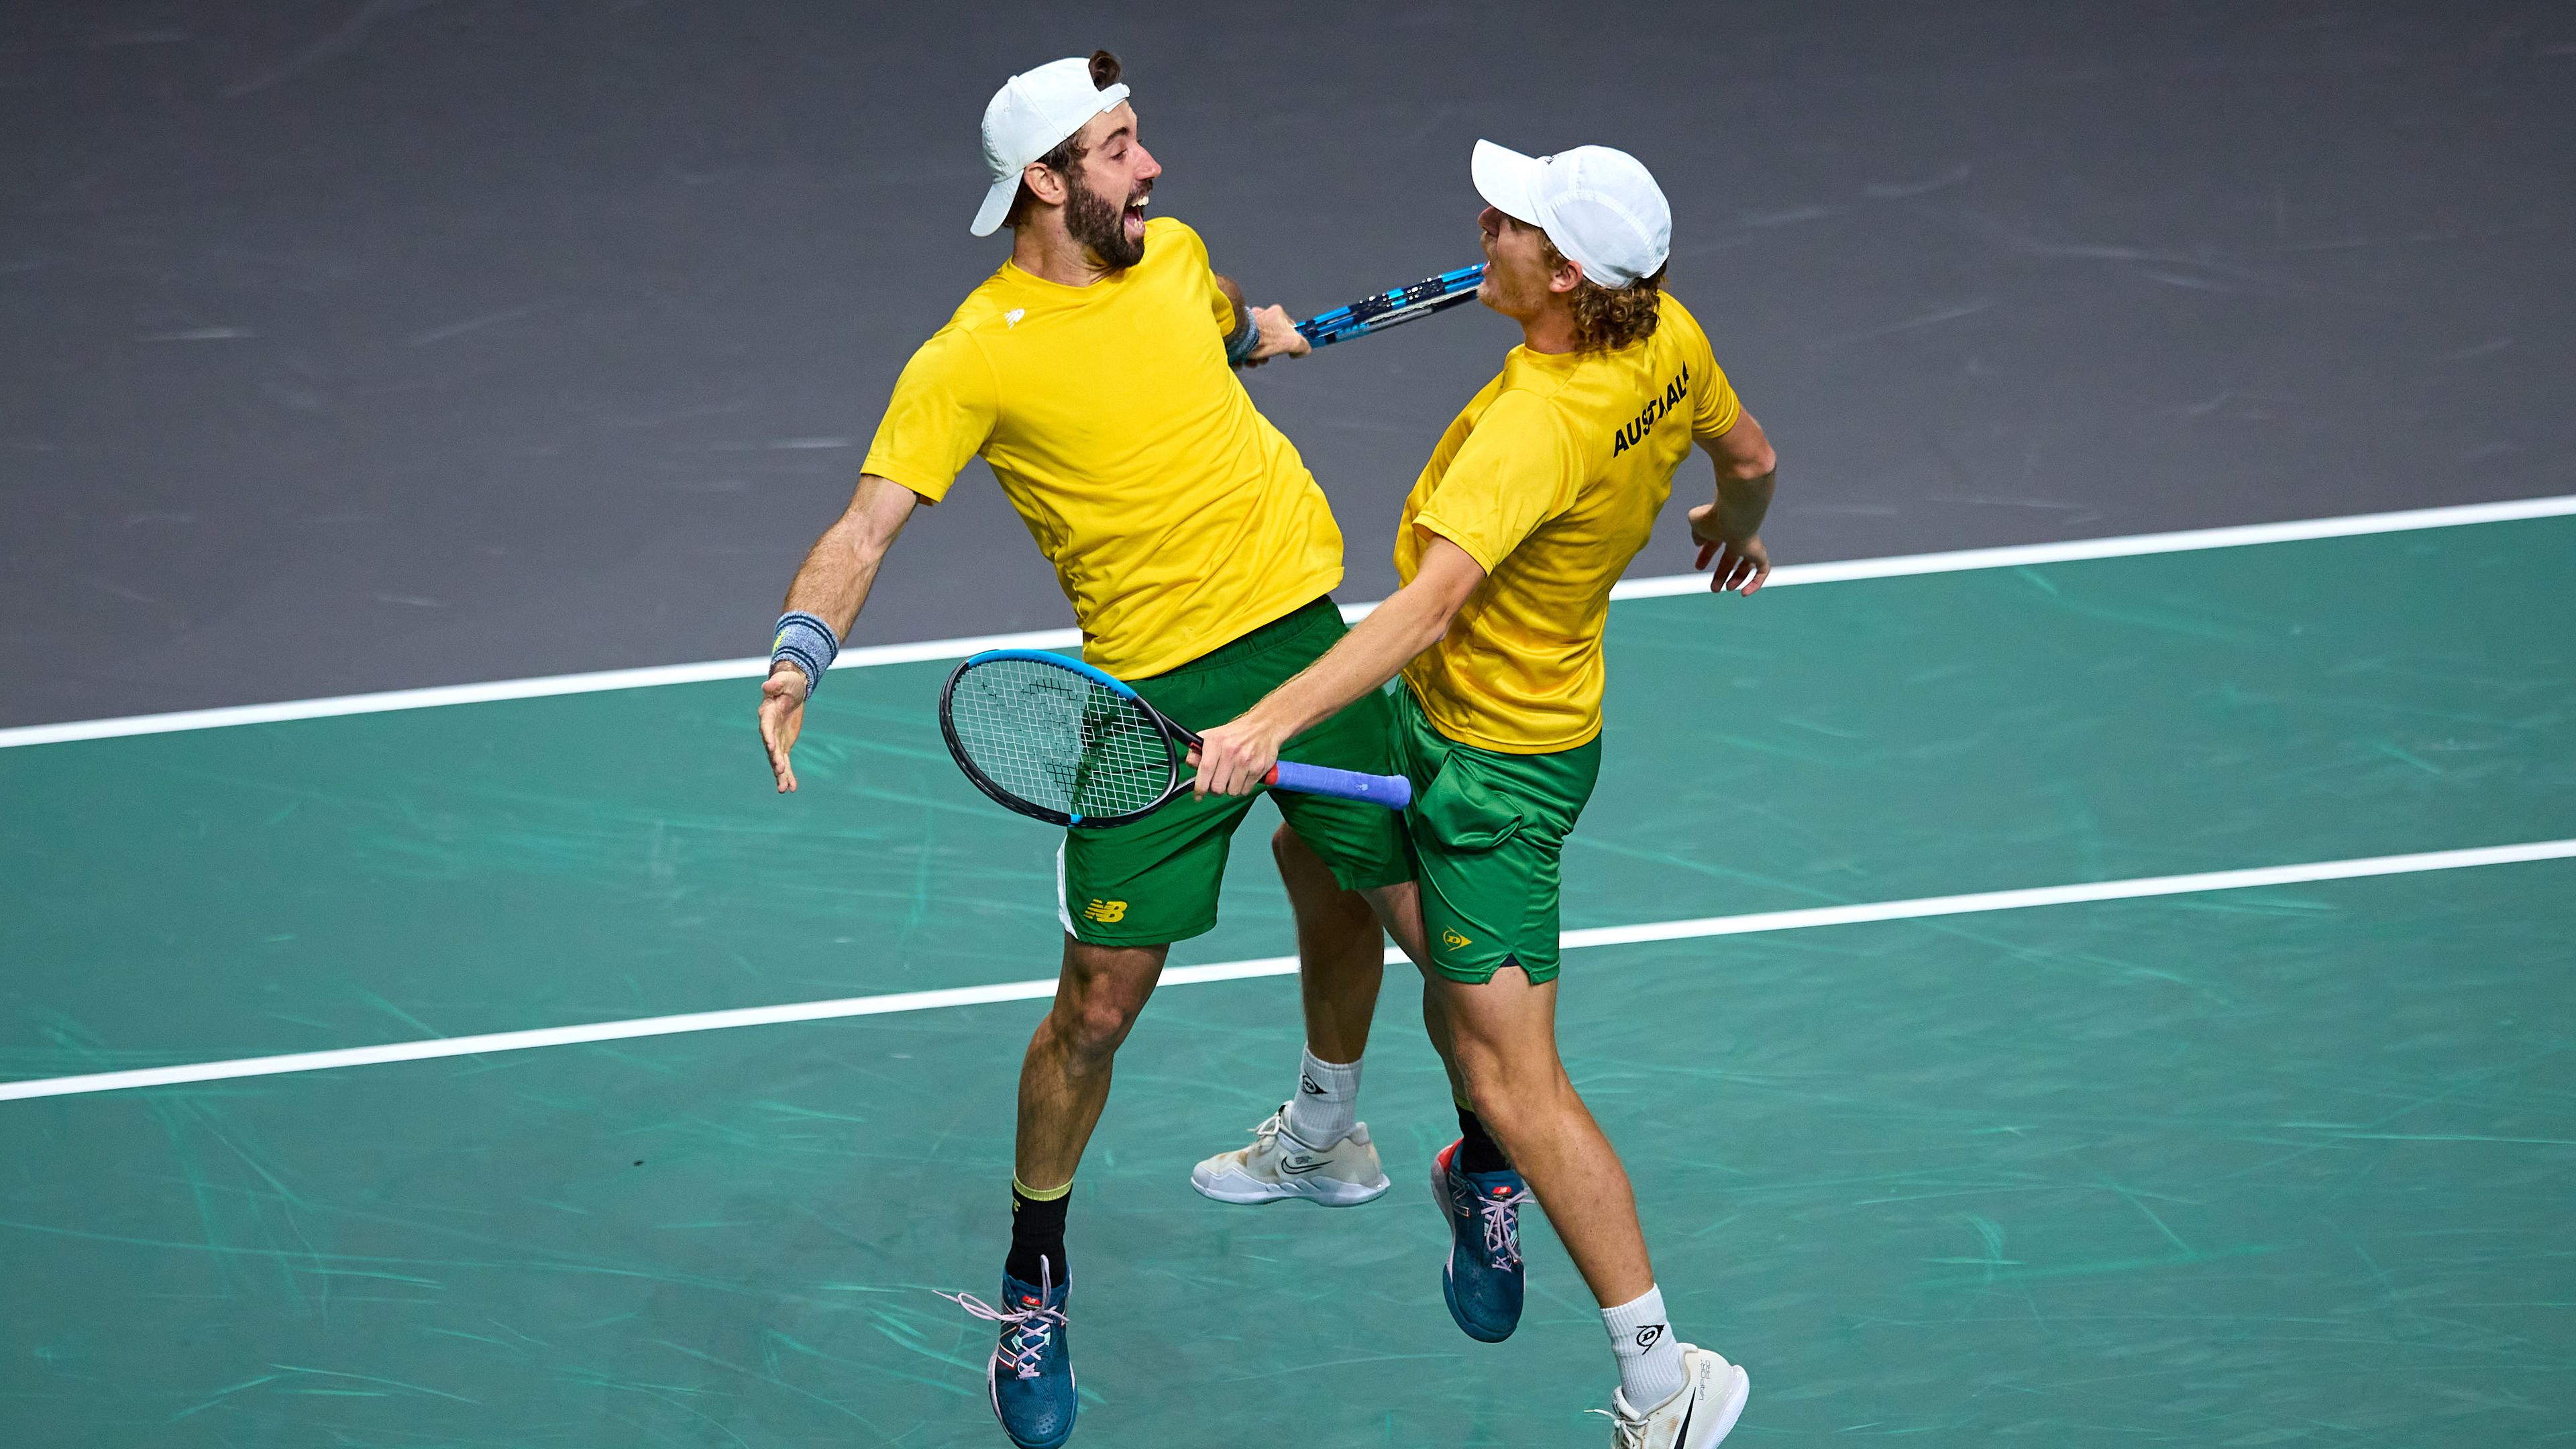 Jordan Thompson of Australia and Max Purcell of Australia celebrate after winning the Davis Cup by Rakuten Finals 2022 Semifinal doubles match between Australia and Croatia at Palacio de los Deportes Jose Maria Martin Carpena on November 25, 2022 in Malaga, Spain. (Photo by Fran Santiago/Getty Images)